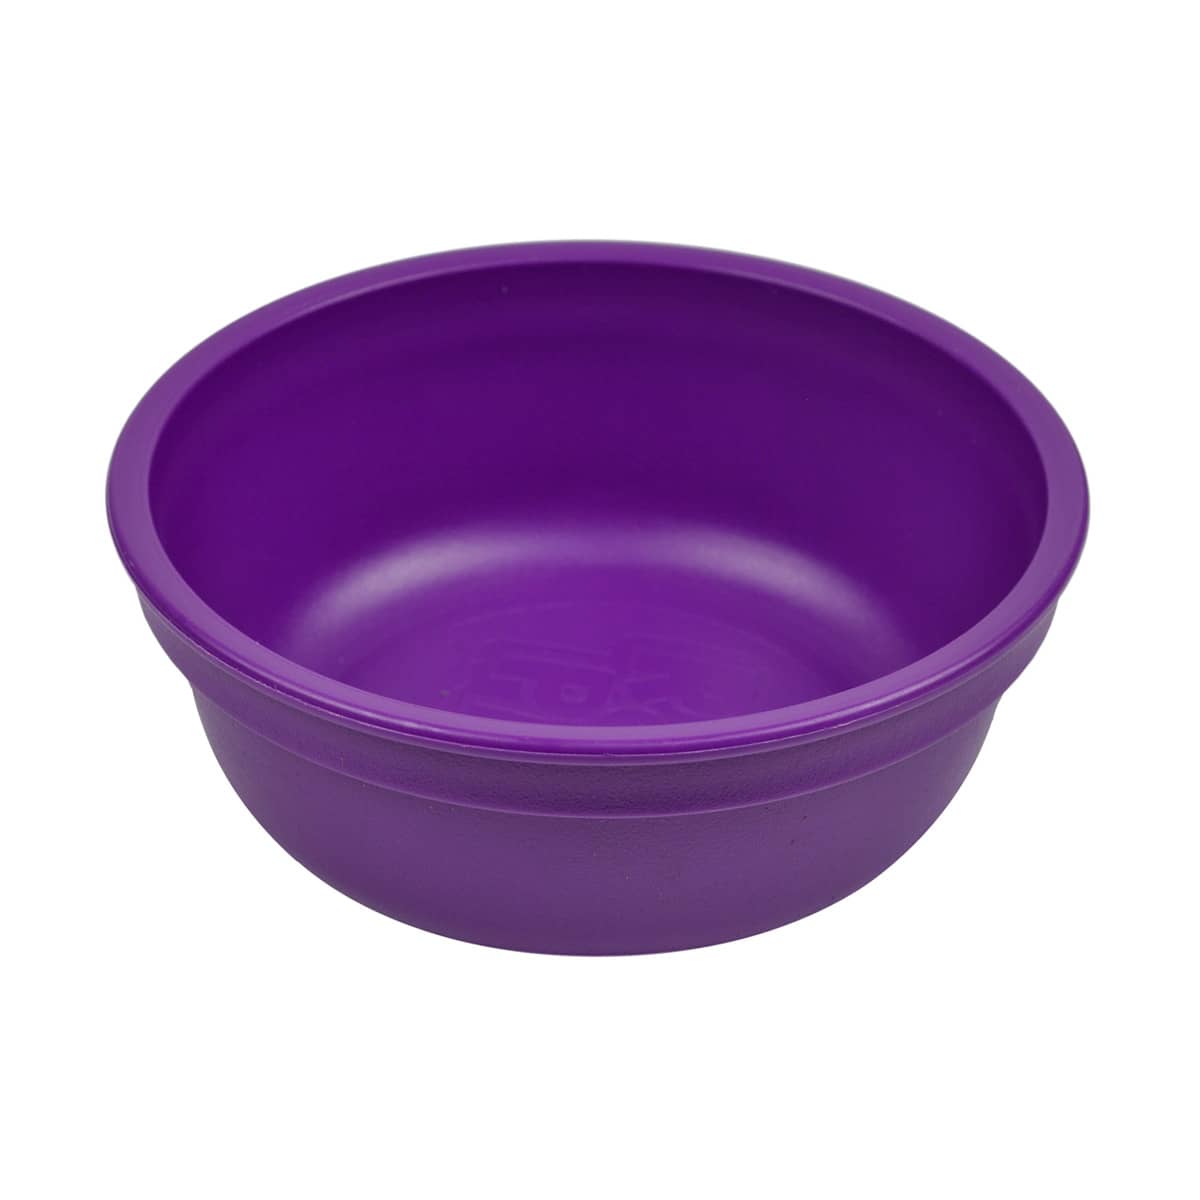 Re-Play Recycled Bowl - Amethyst